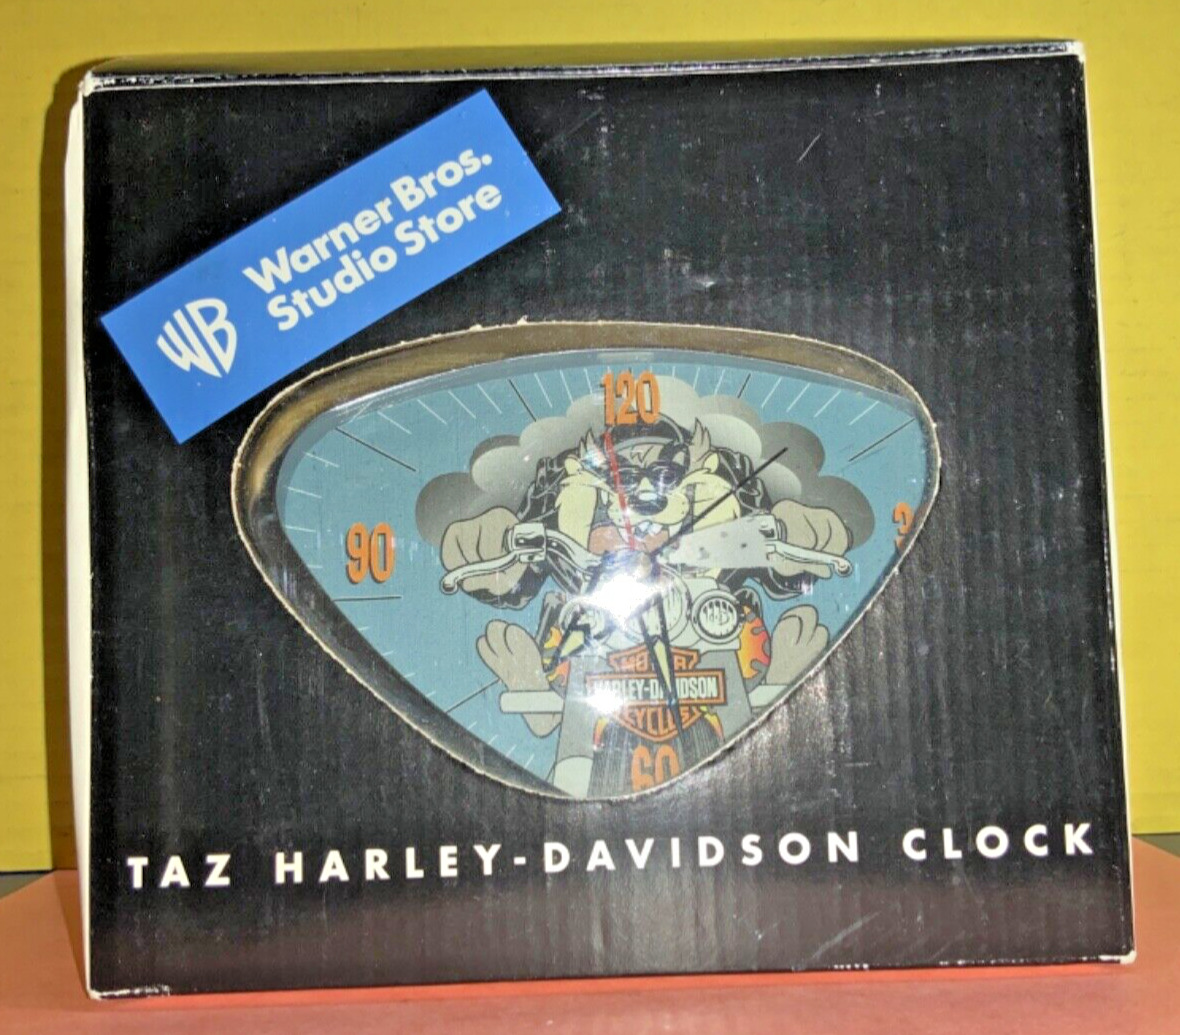 Vintage 2000 Looney Tunes Taz Harley-Davidson Clock - BOXED - AS IS - NOT TESTED